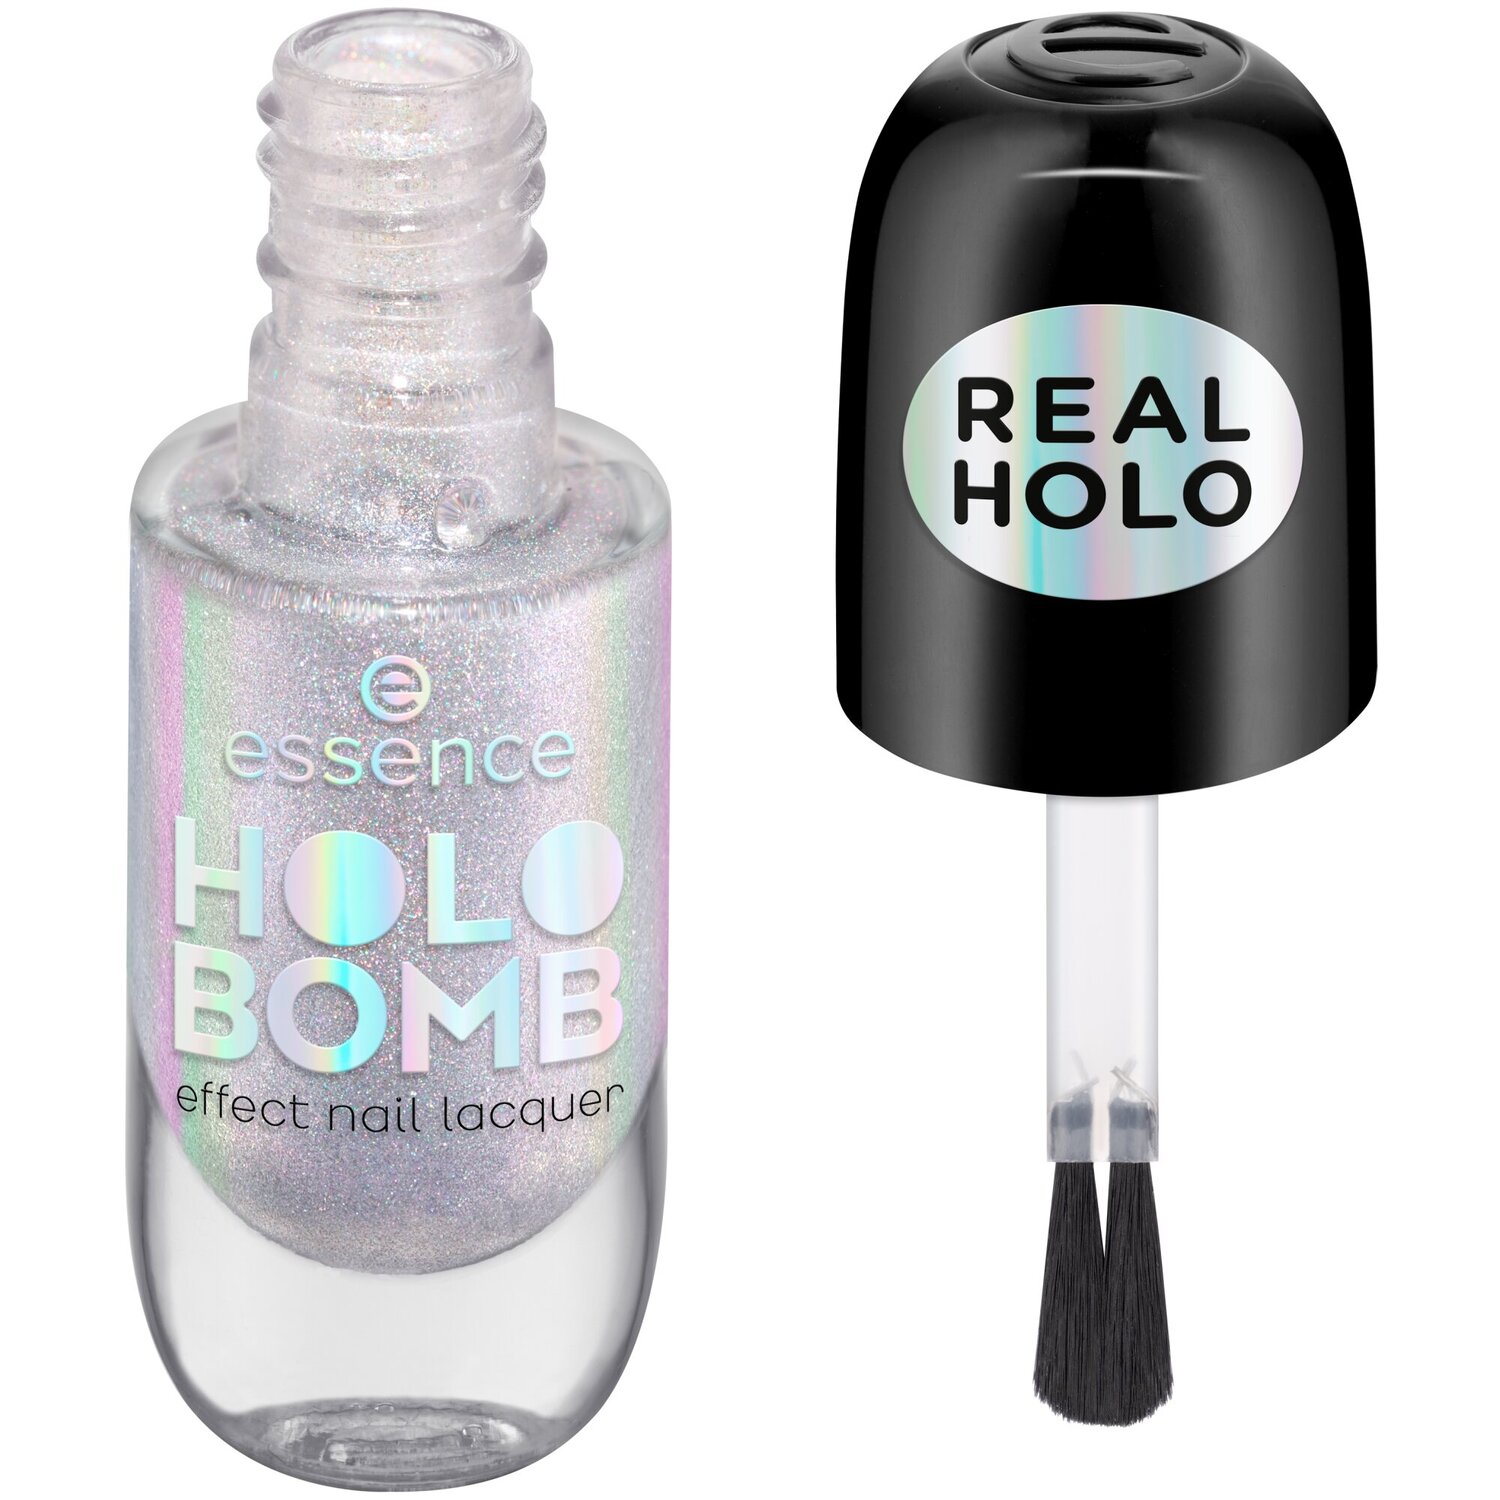 essence Holo Bomb Effect Nail Lacquer - Silver Image